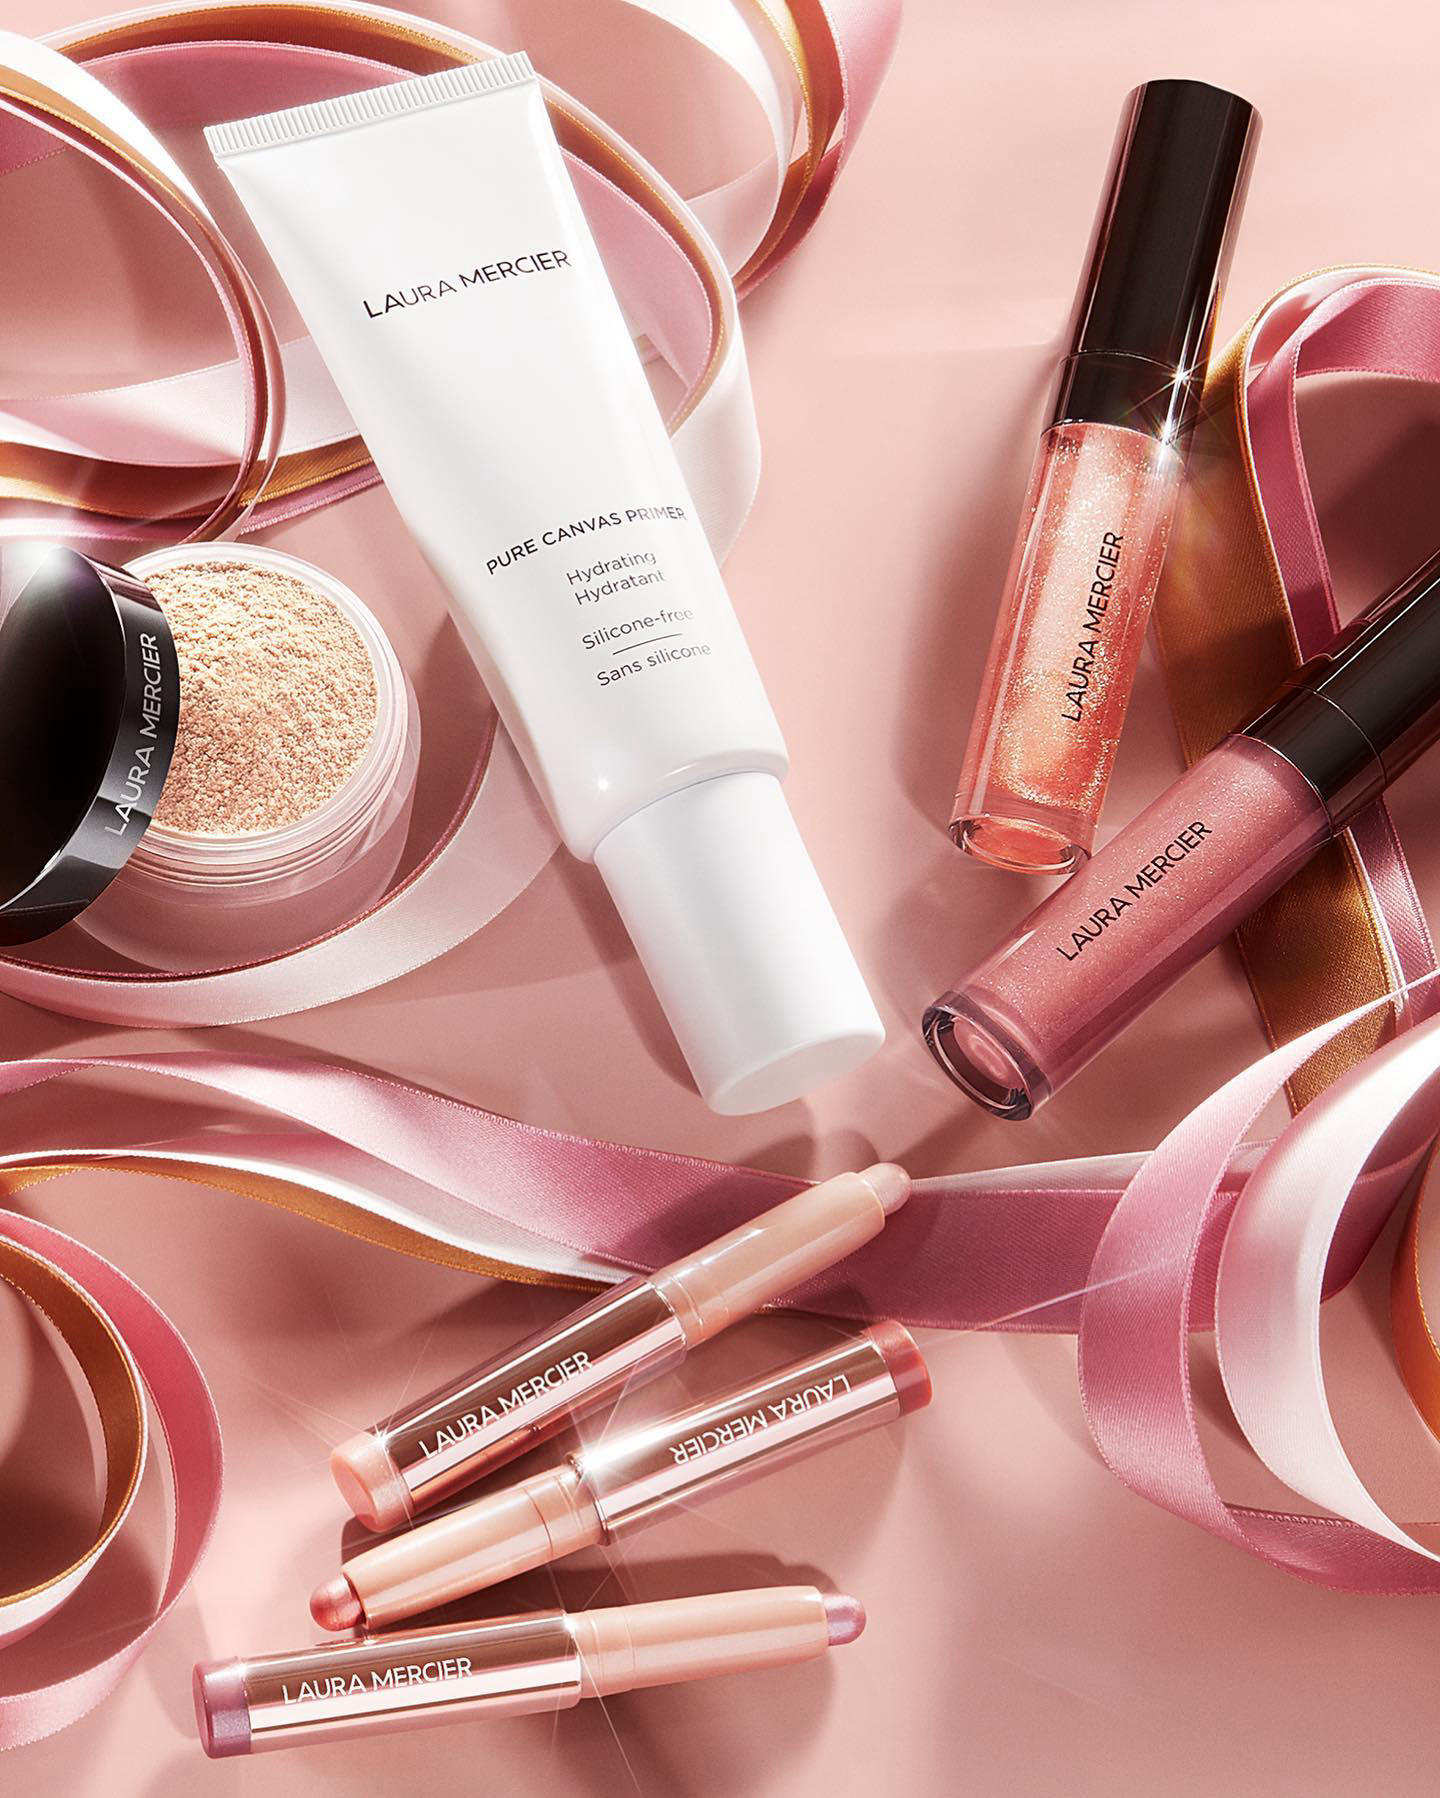 Laura Mercier - Luxe limited editions that elevate natural beauty